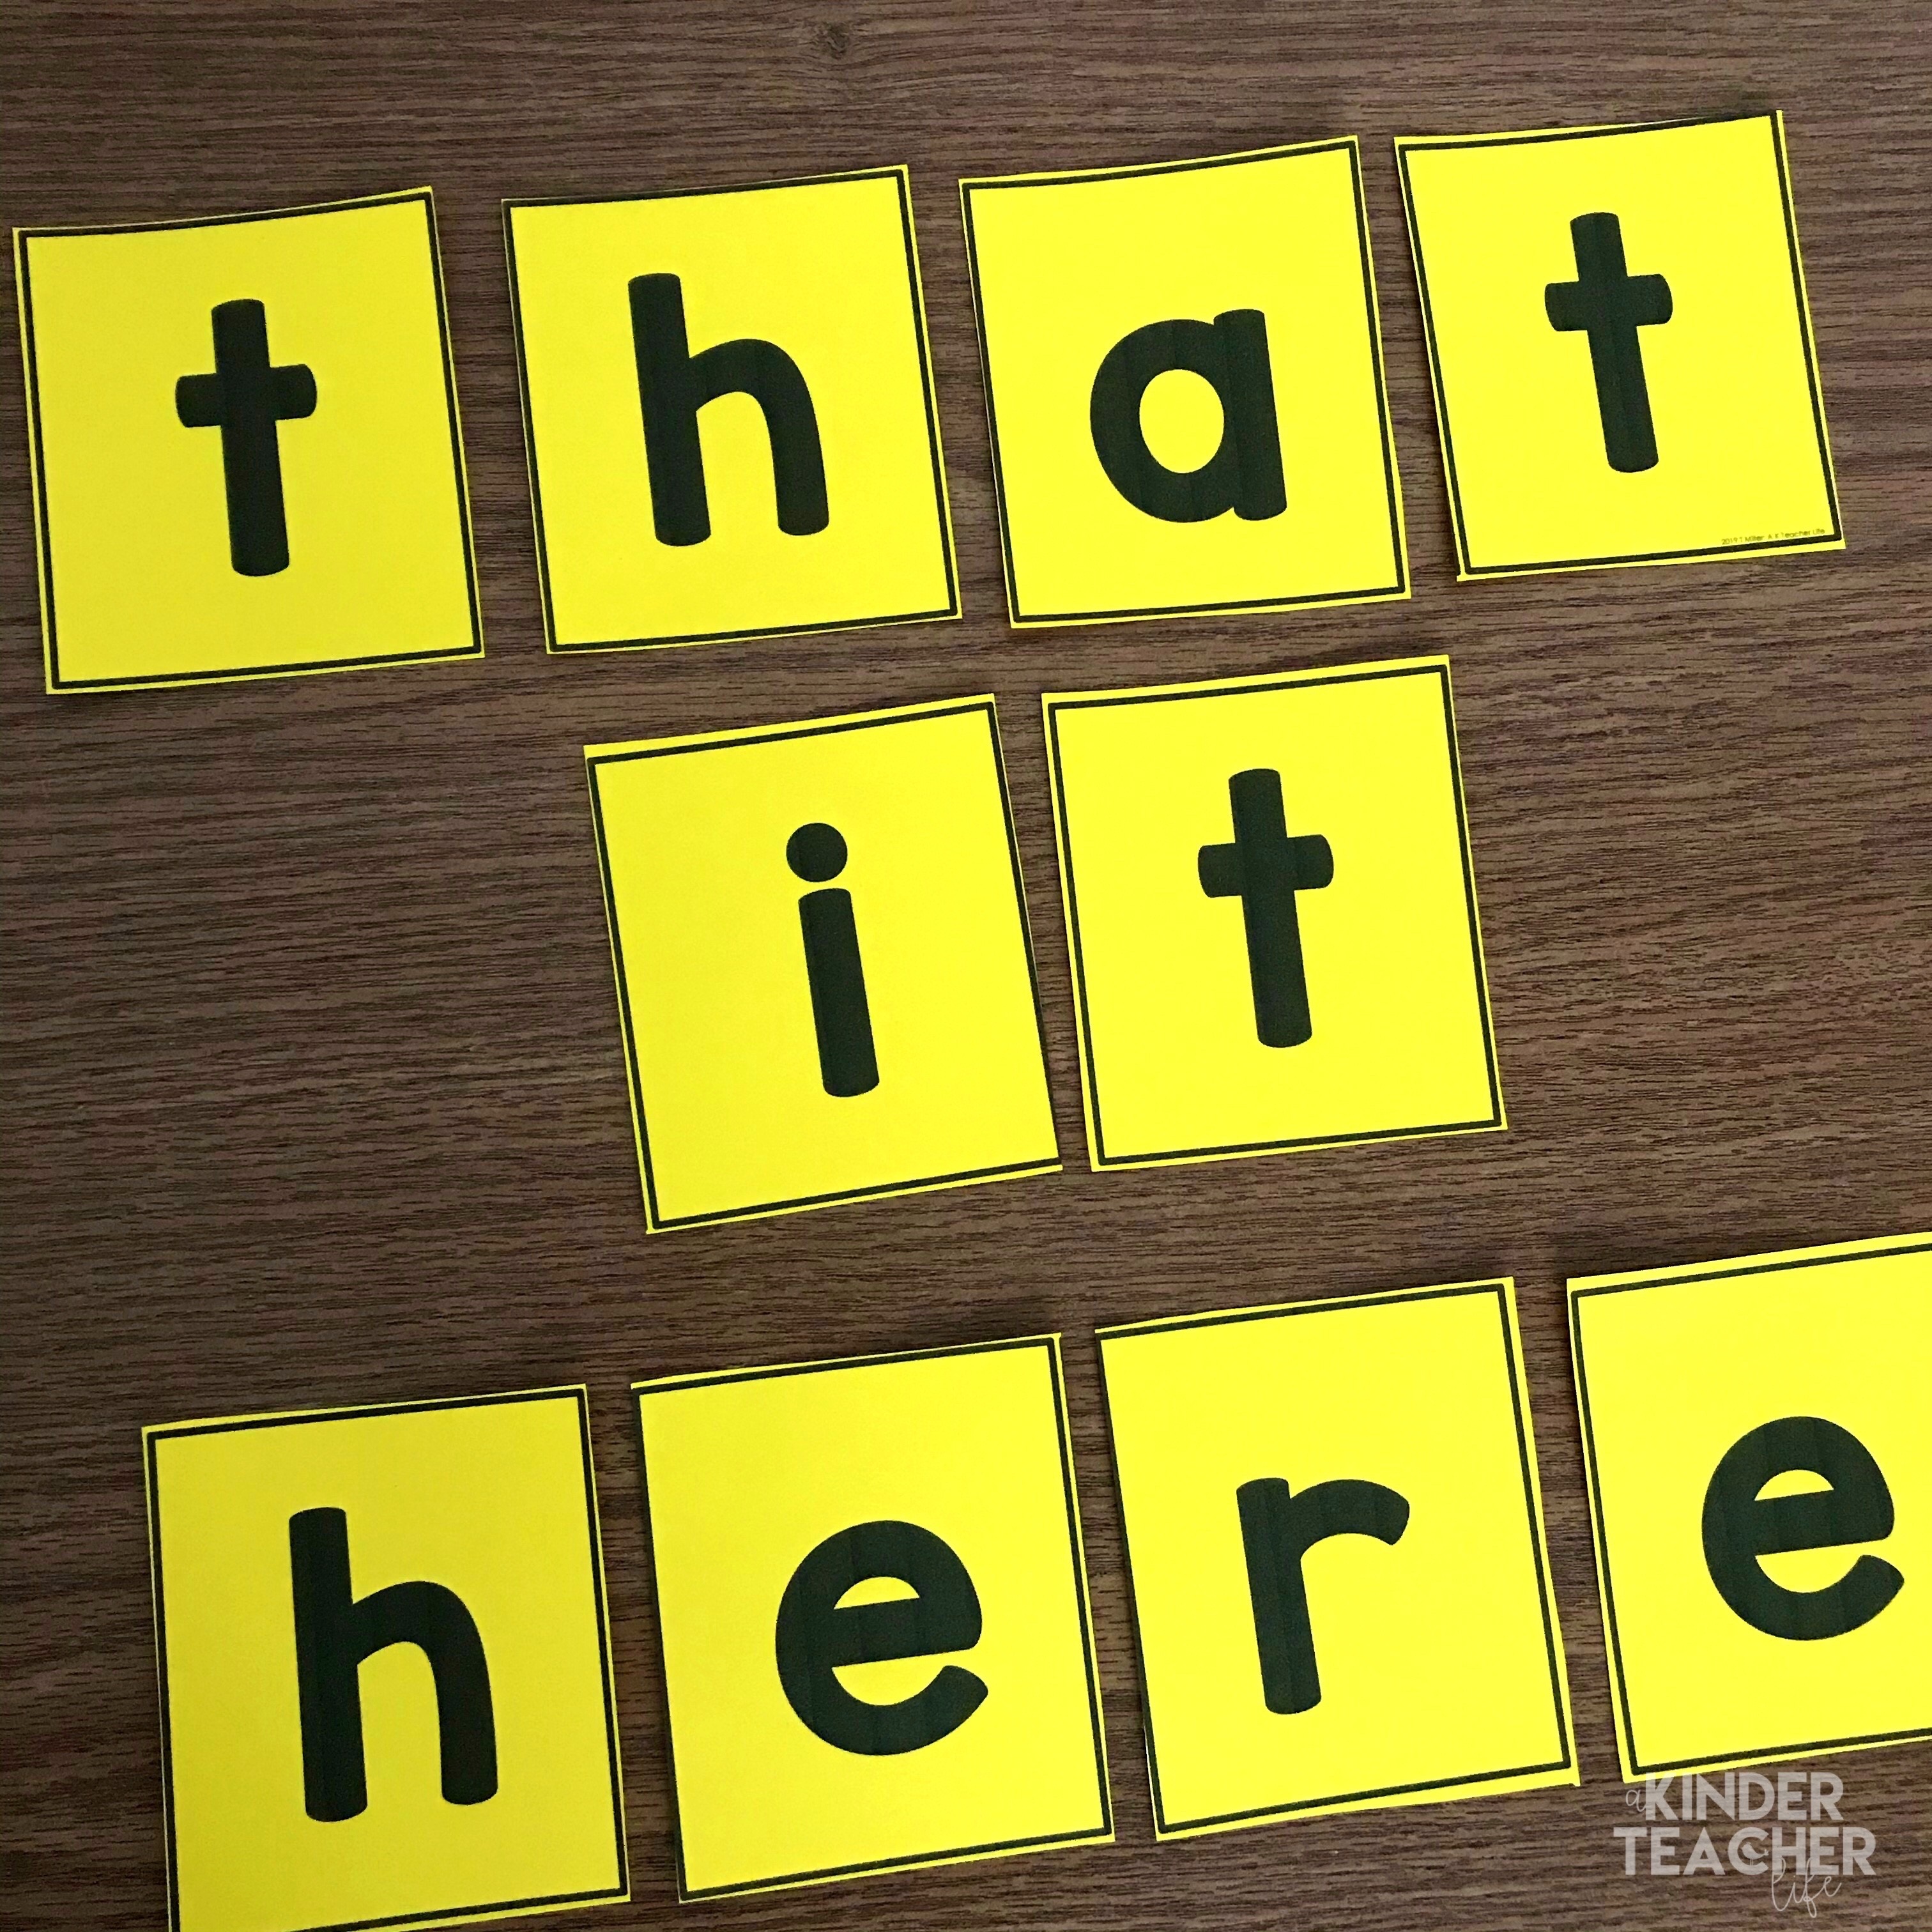 Sight word activity - mix up the letters and have another student put them in correct order. 